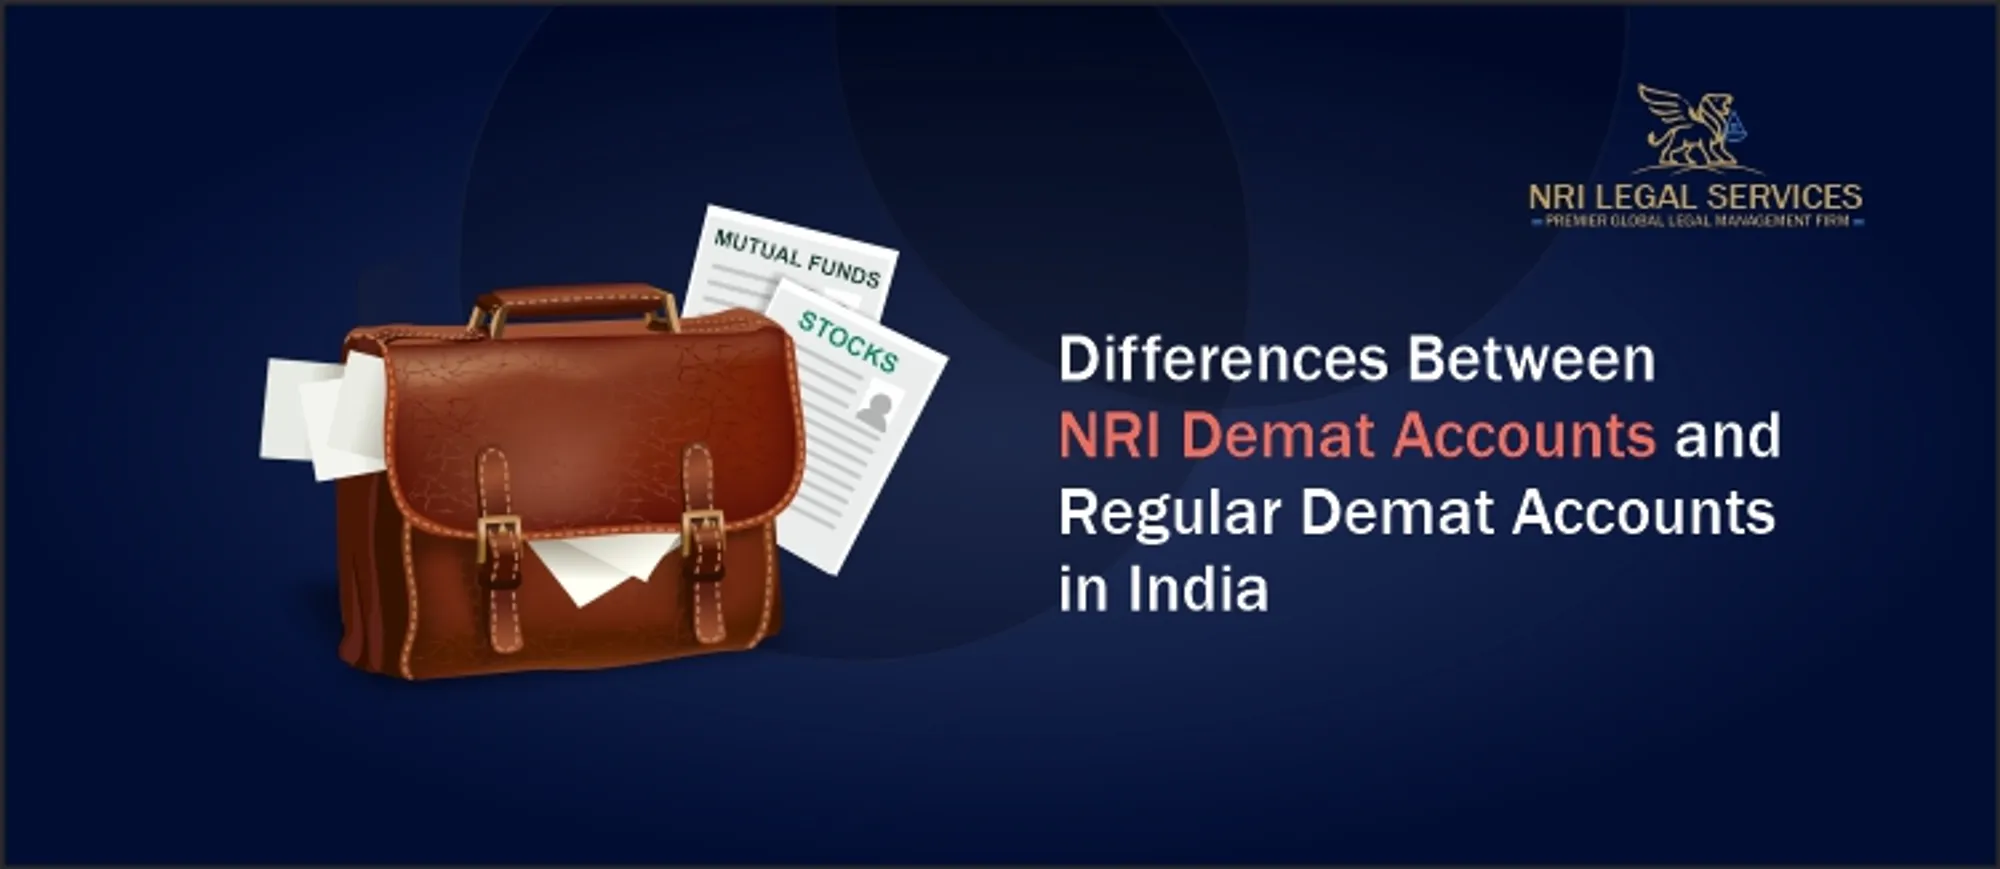 NRI Demat Accounts and Regular Demat Accounts in India – Understanding The Differences